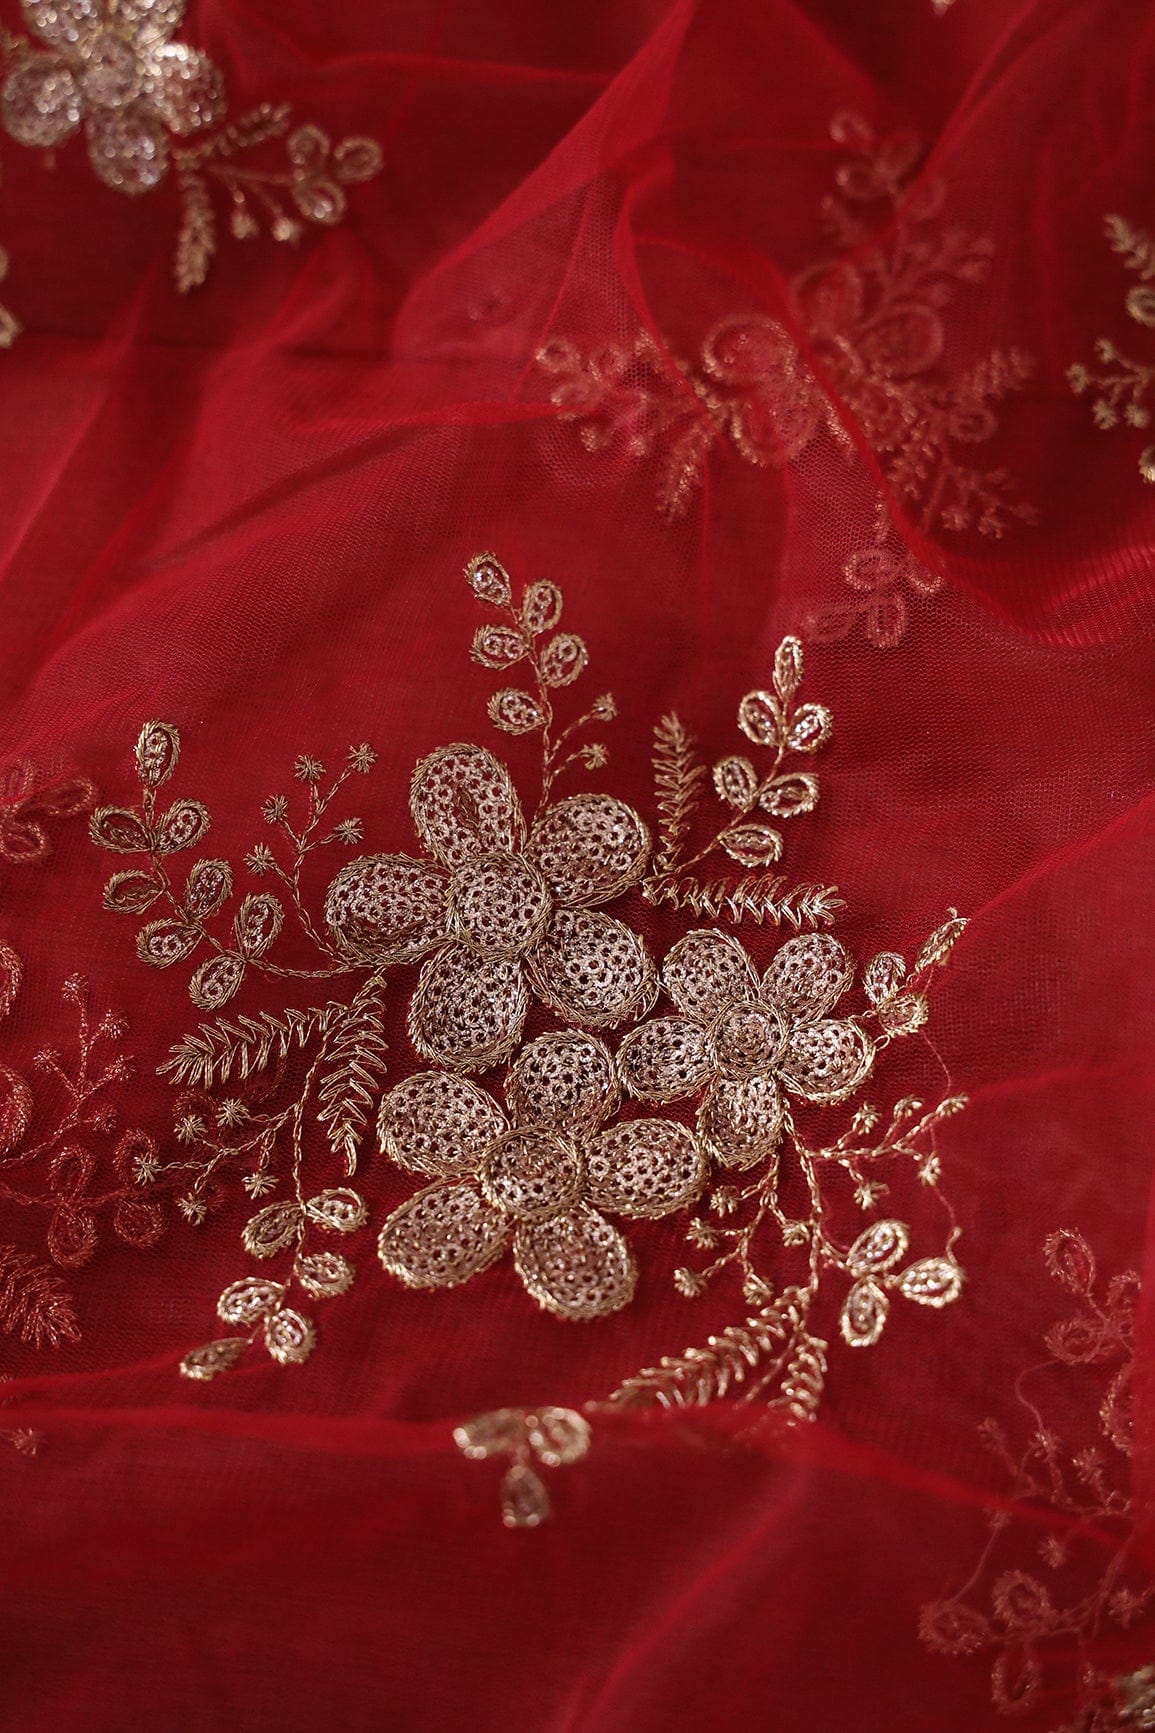 doeraa Embroidery Fabrics 1.50 Meter Cut Piece Of Gold Sequins And Gold Zari Floral Embroidery Work On Red Soft Net Fabric